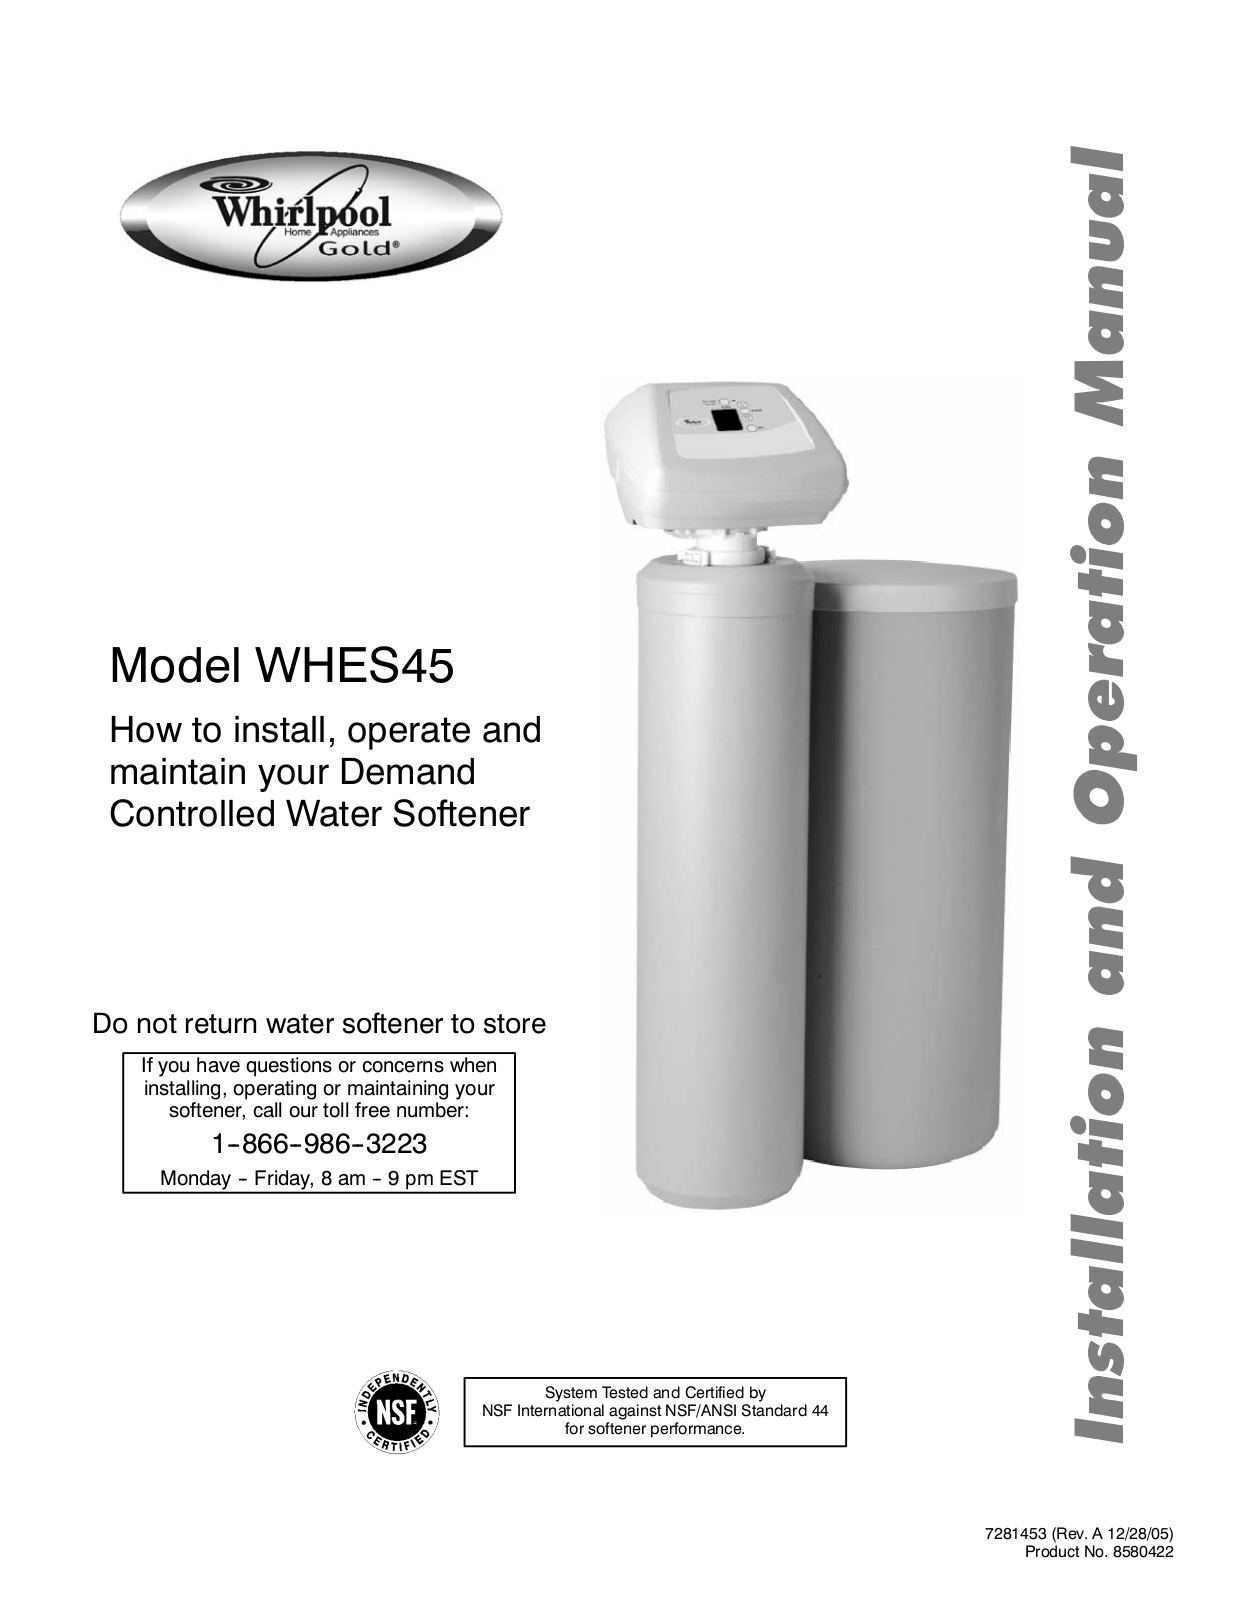 Whirlpool WHES45 Owner's Manual